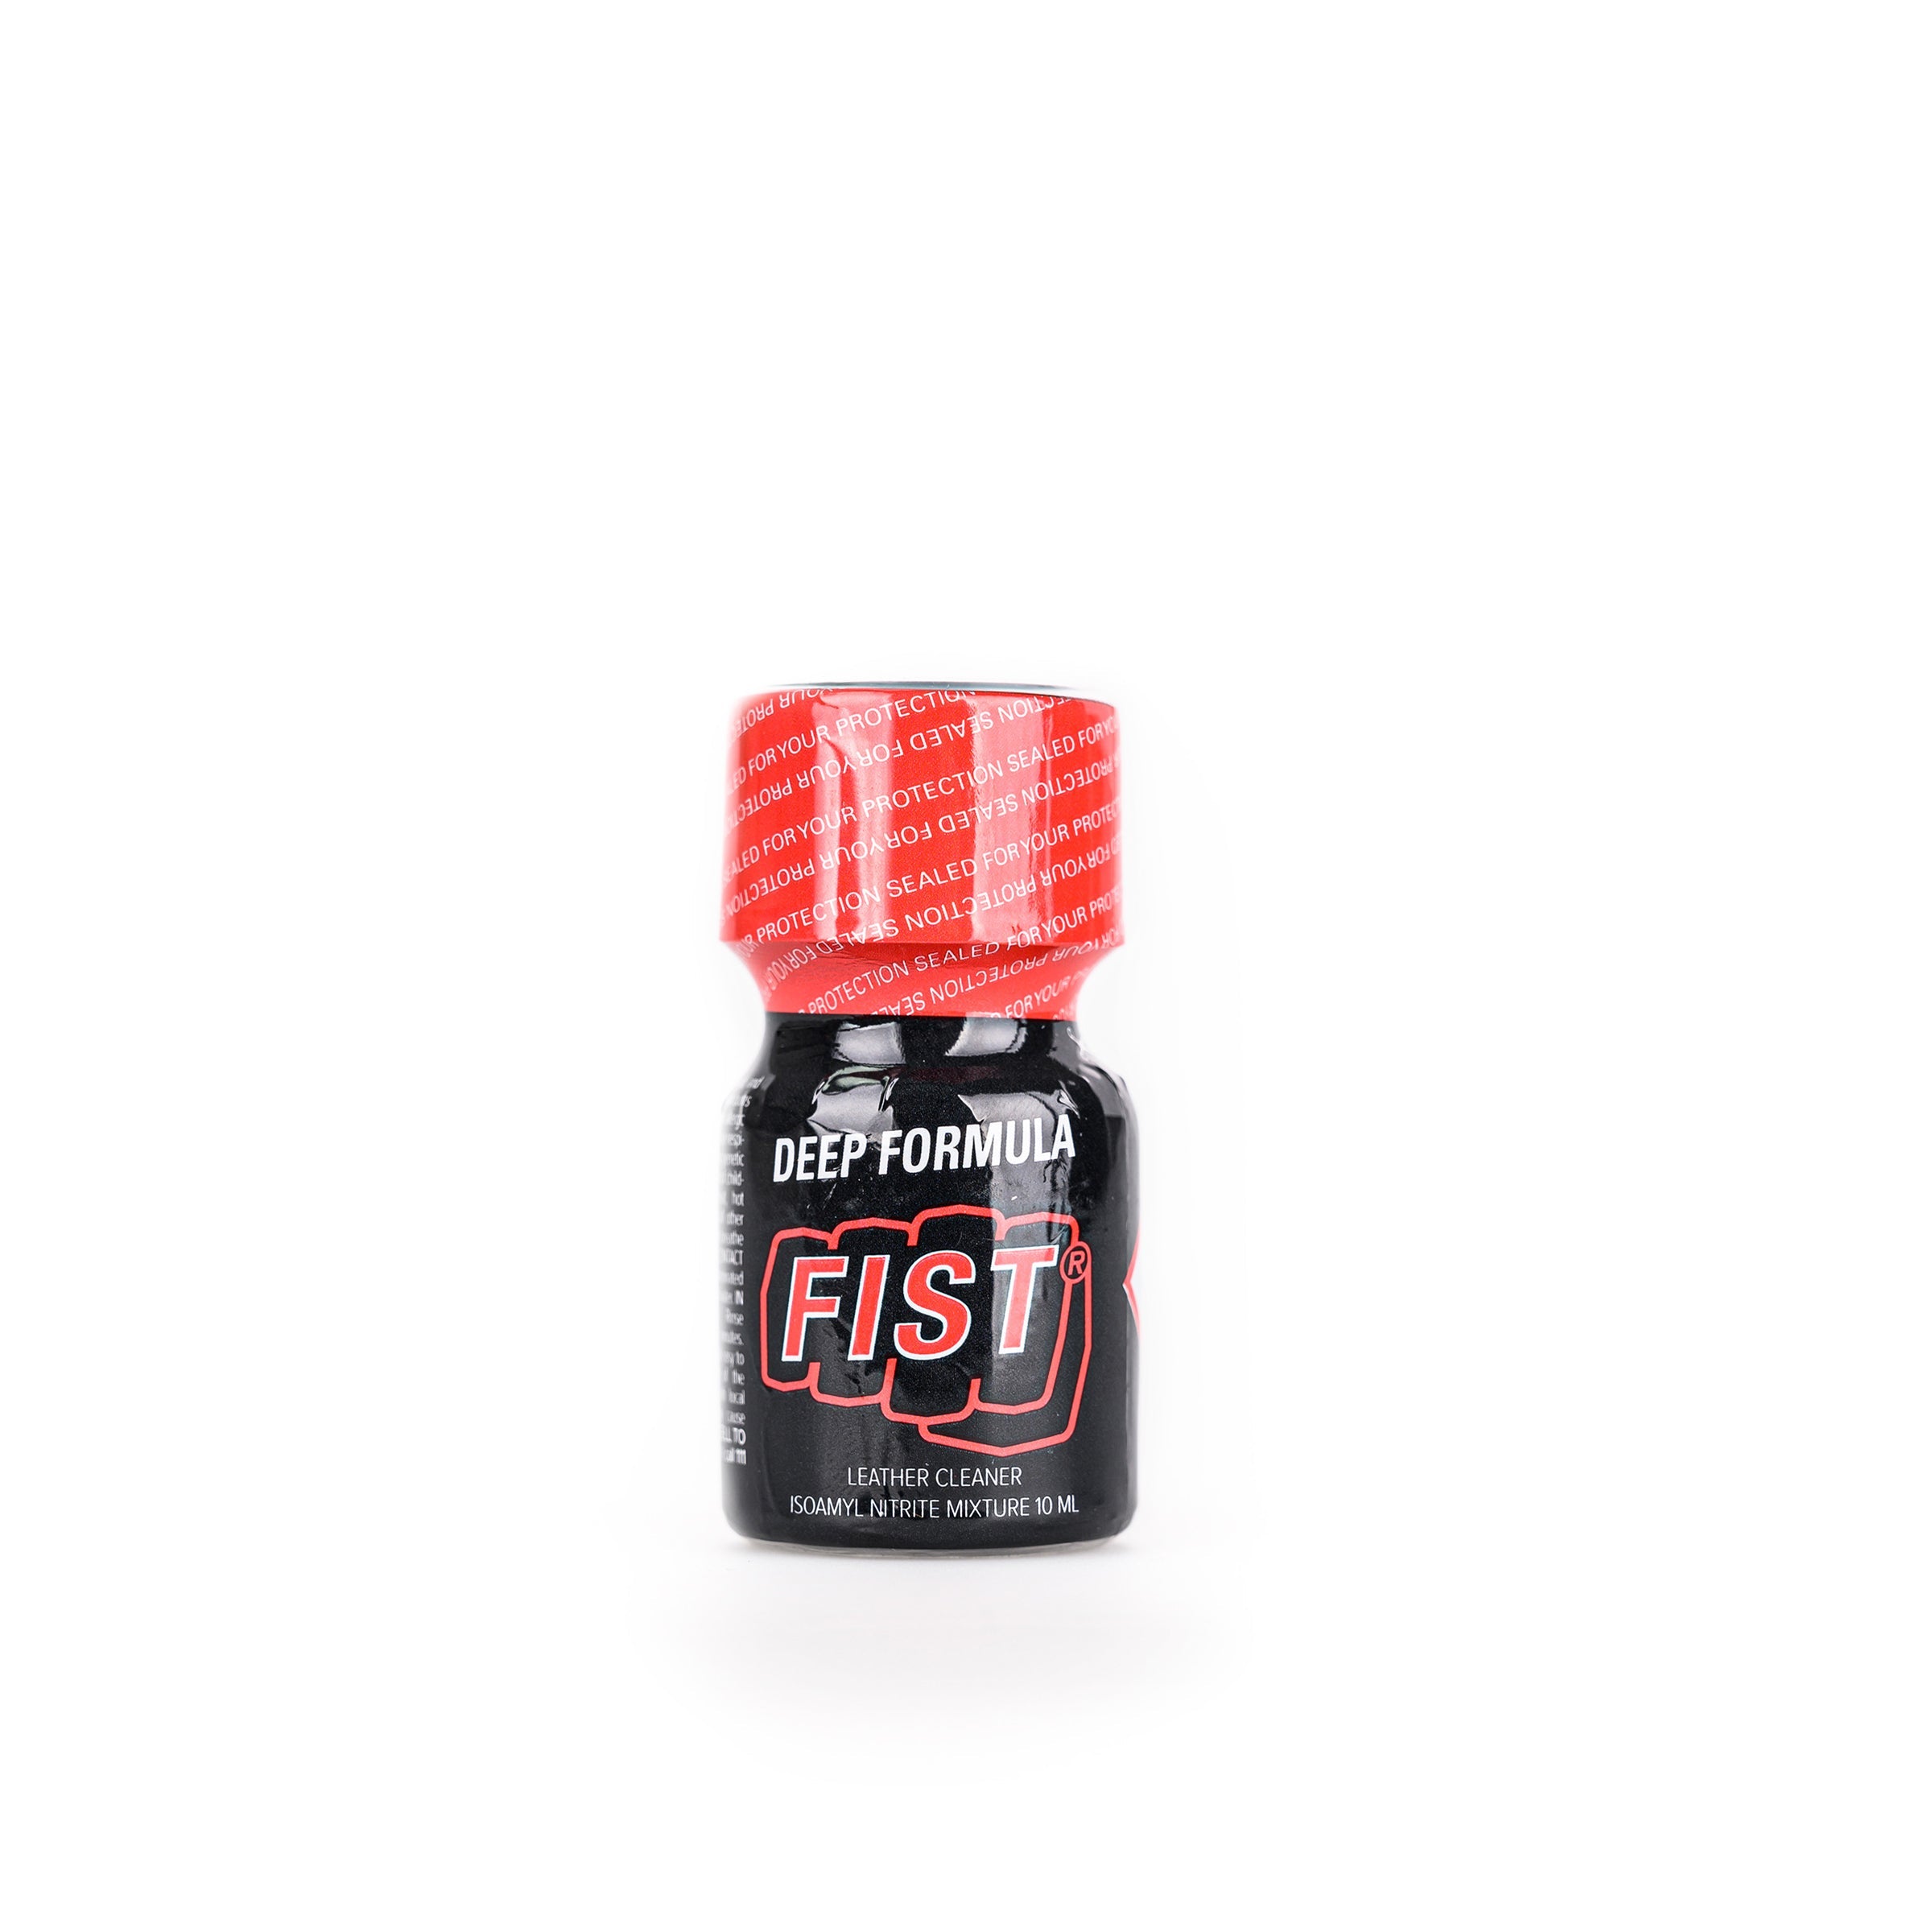 Fist Deep Formula 10ml, POPPERS UK, POPPERS USA, FREE DELIVERY, NEXT DAY DELIVERY